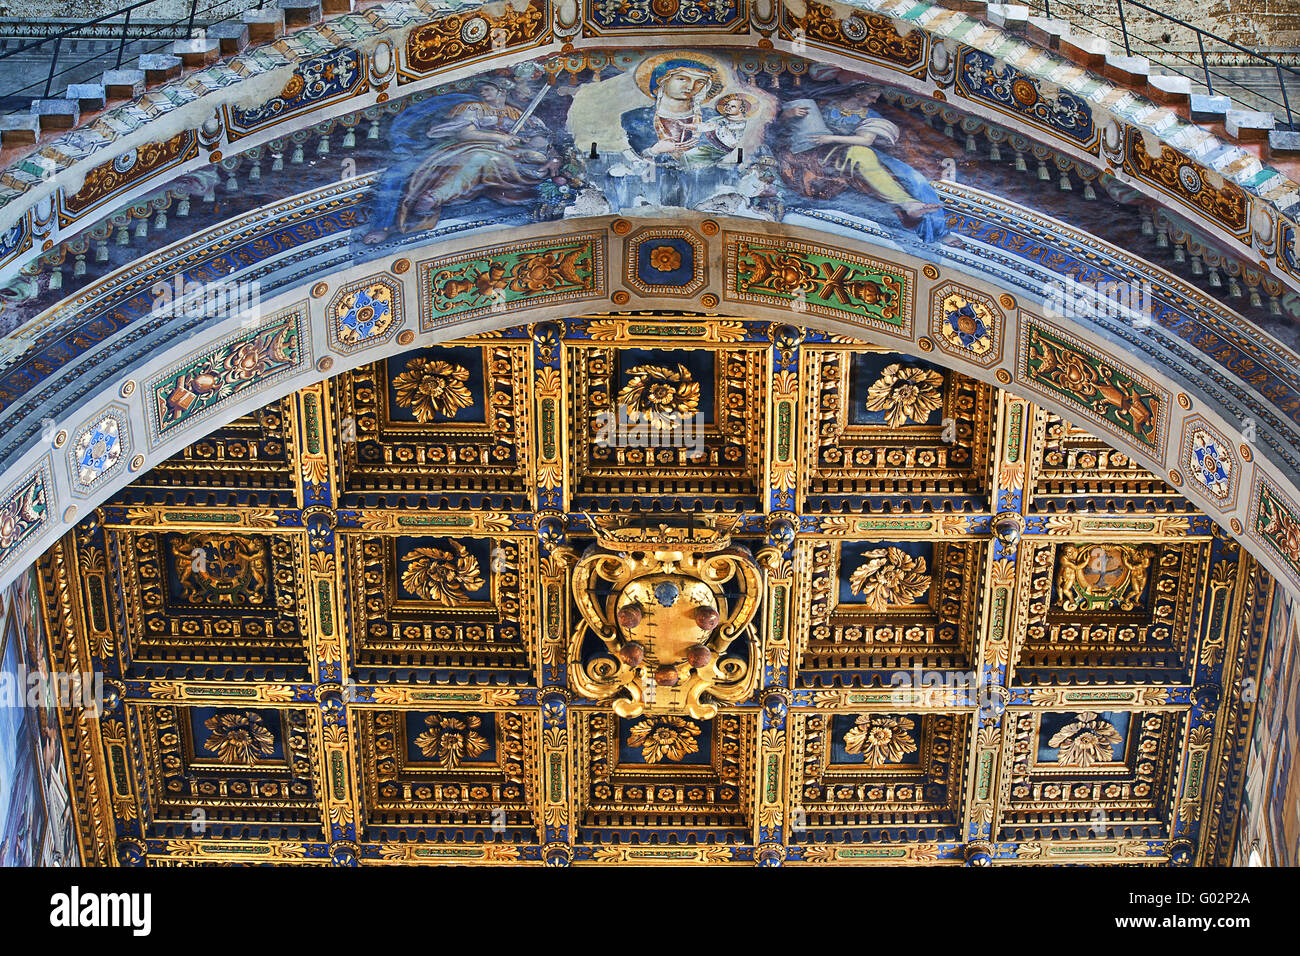 ceiling detail of the Pisa Duomo, Tuscany, Italy Stock Photo